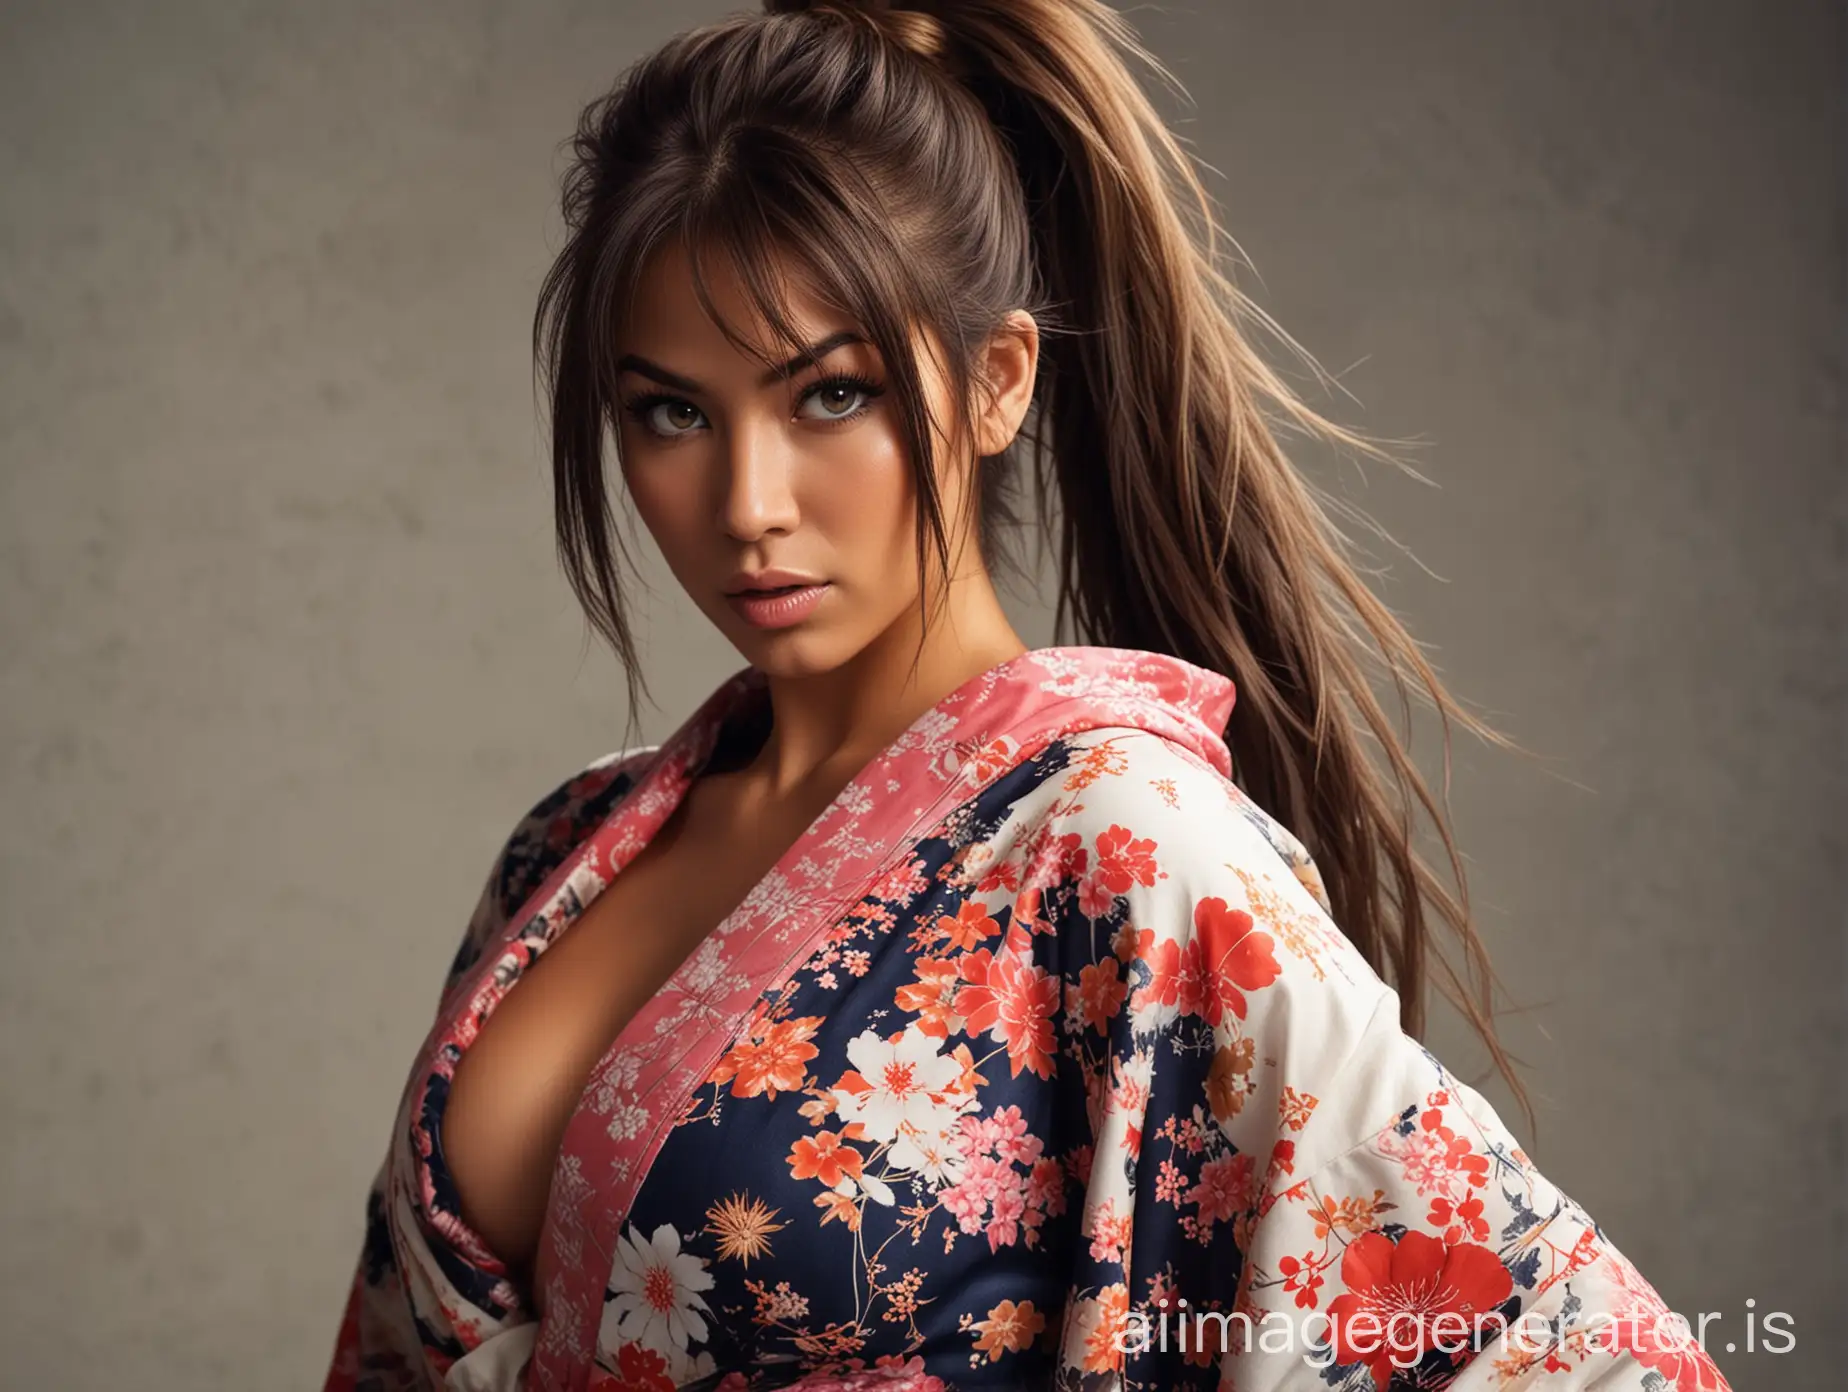 Extremely gigantic woman; extremely muscular; beautiful; sexy; seductive; cute; high messy pony with long bangs; big cleavage; extremely massive and muscular arms; extremely massive six-pack; tanned; with kimono sleeves; hooded;